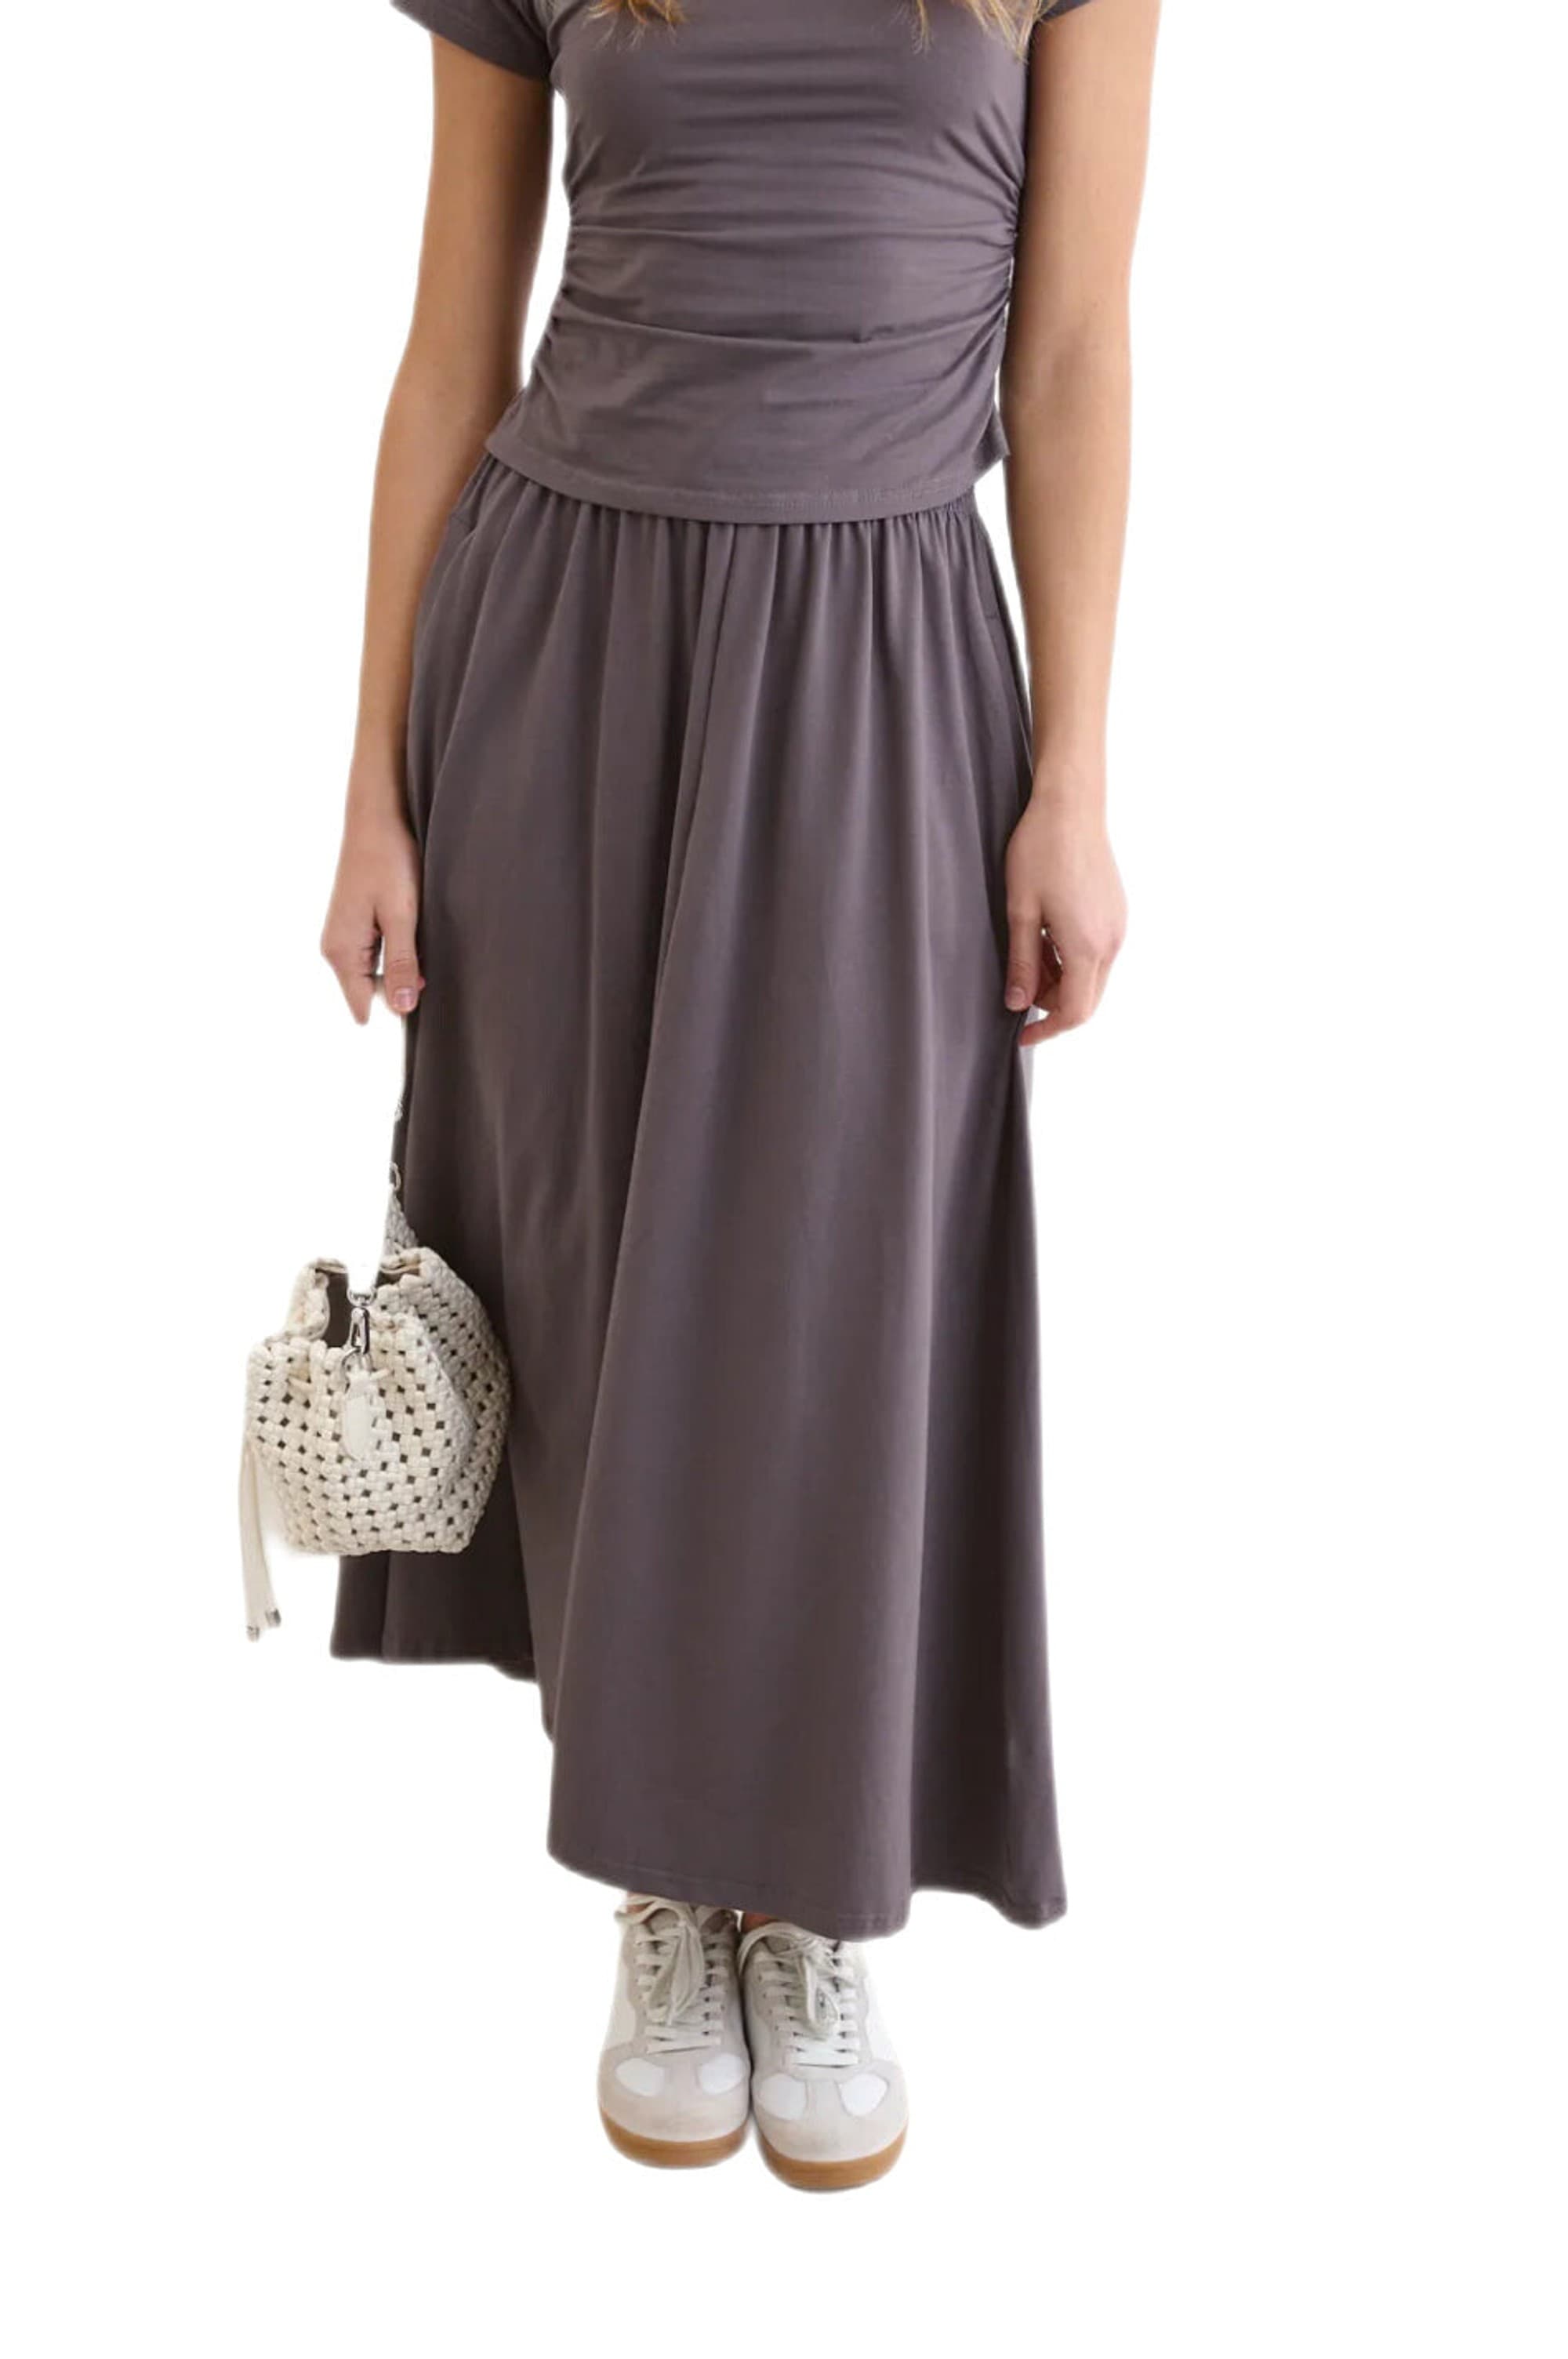 Clever Alice Grey Maxi Skirt - clever alice